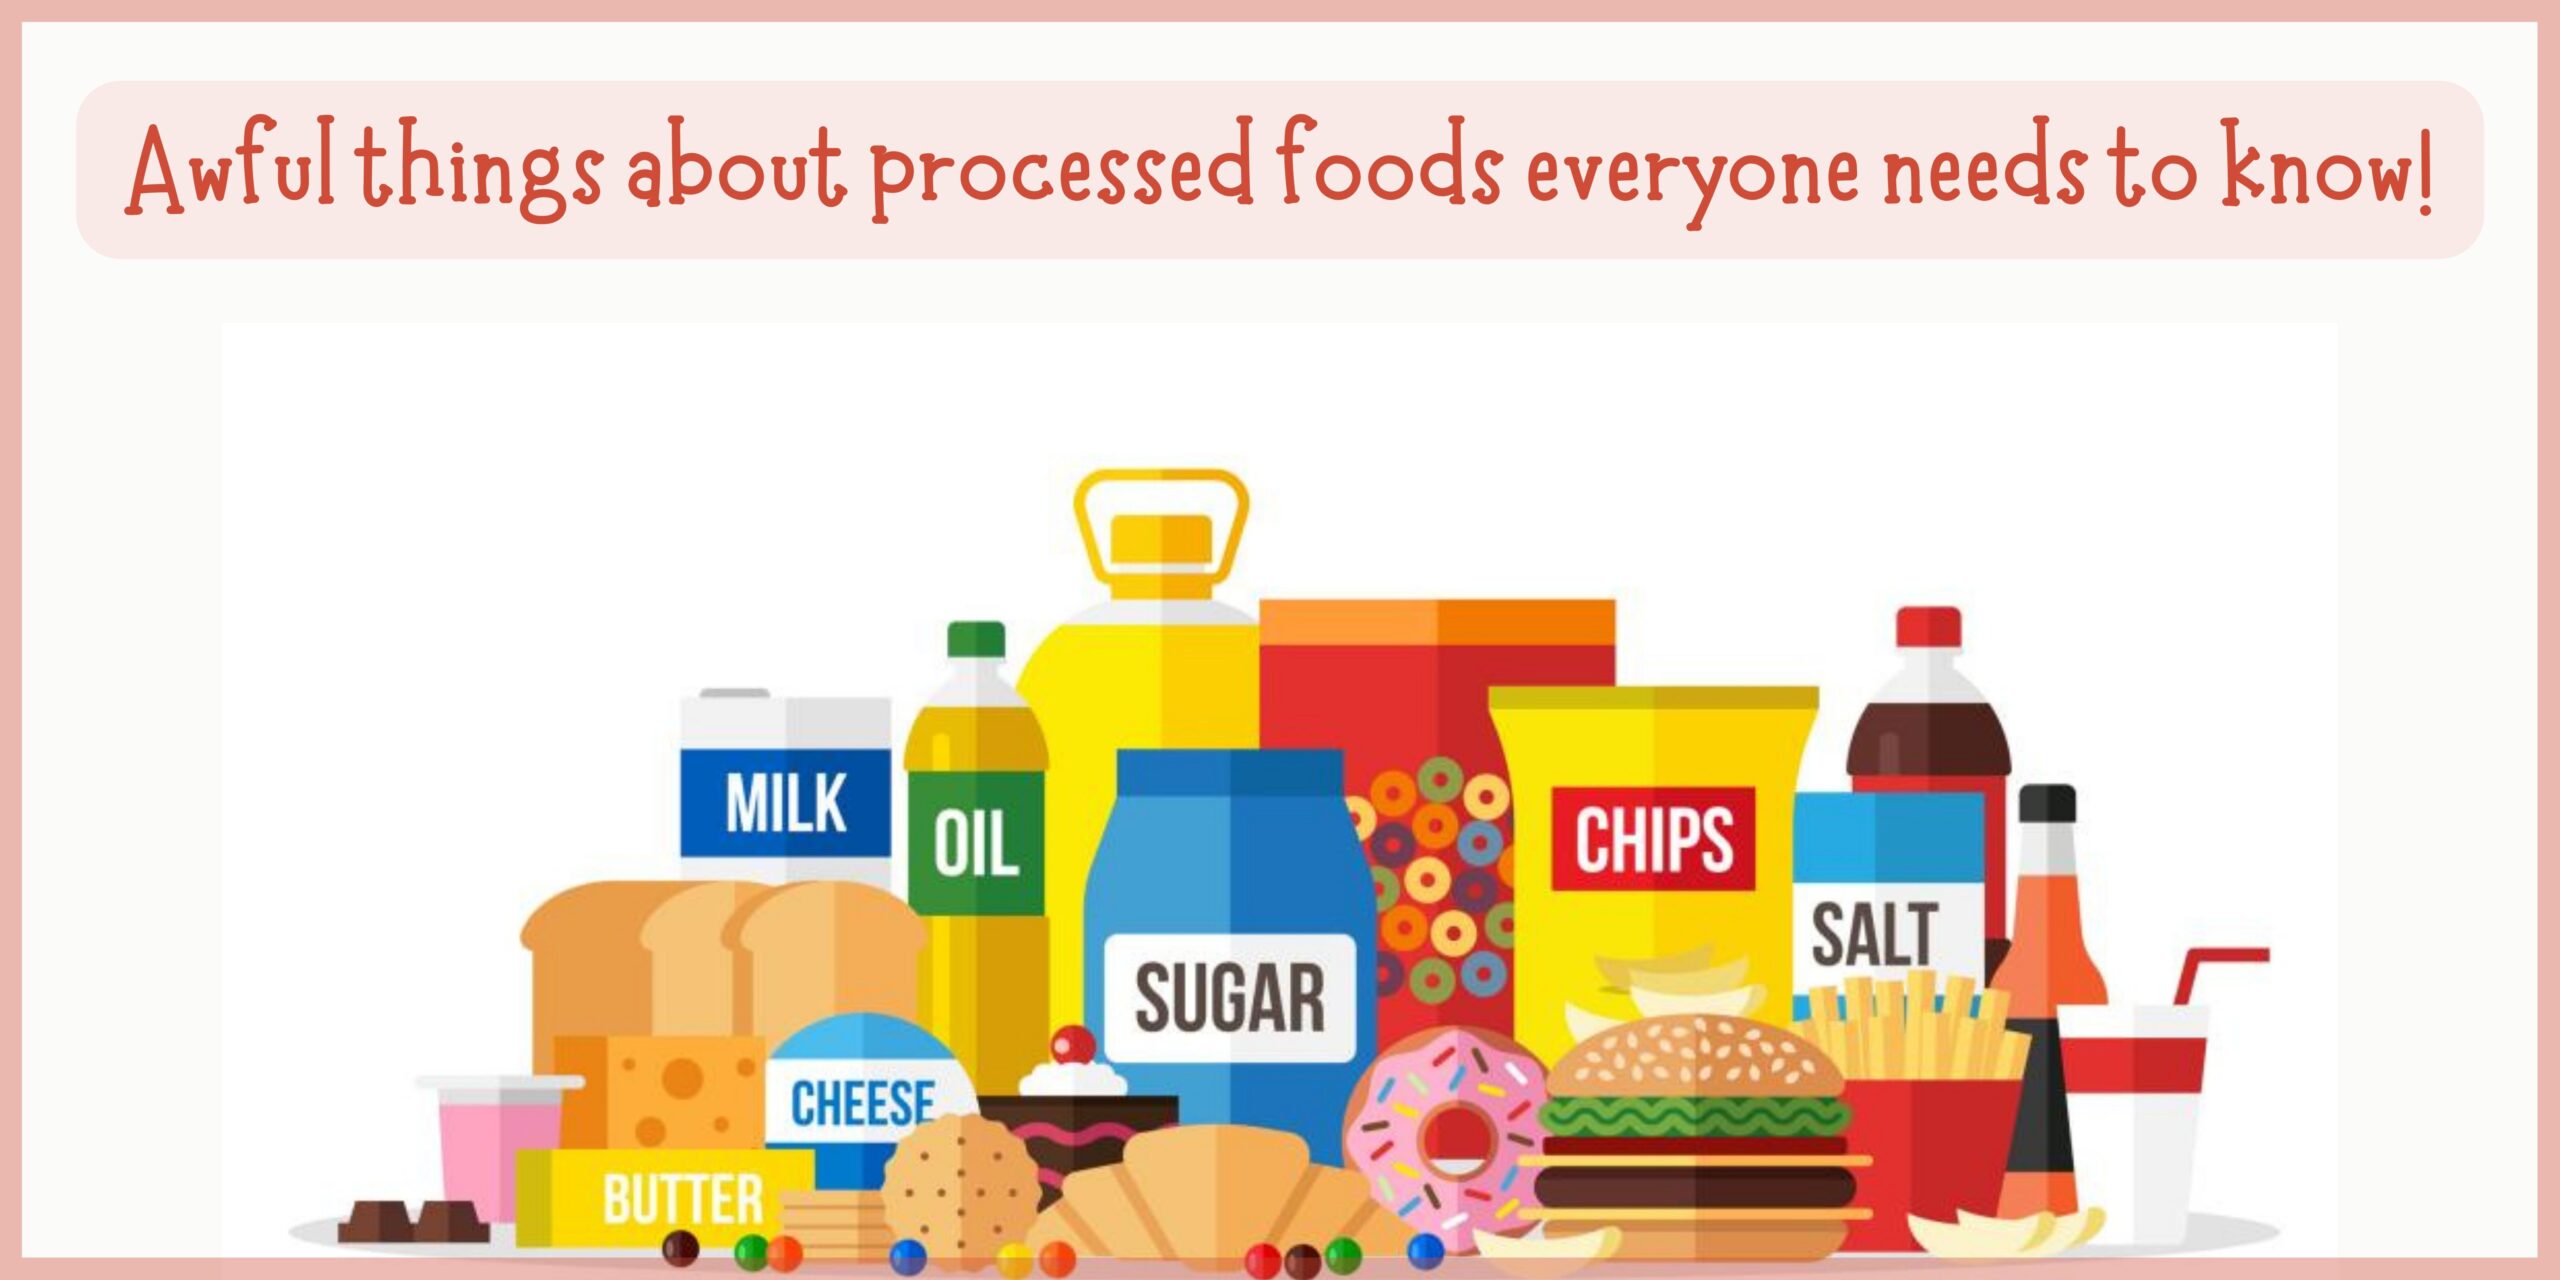 Awful things about processed foods everyone needs to know!